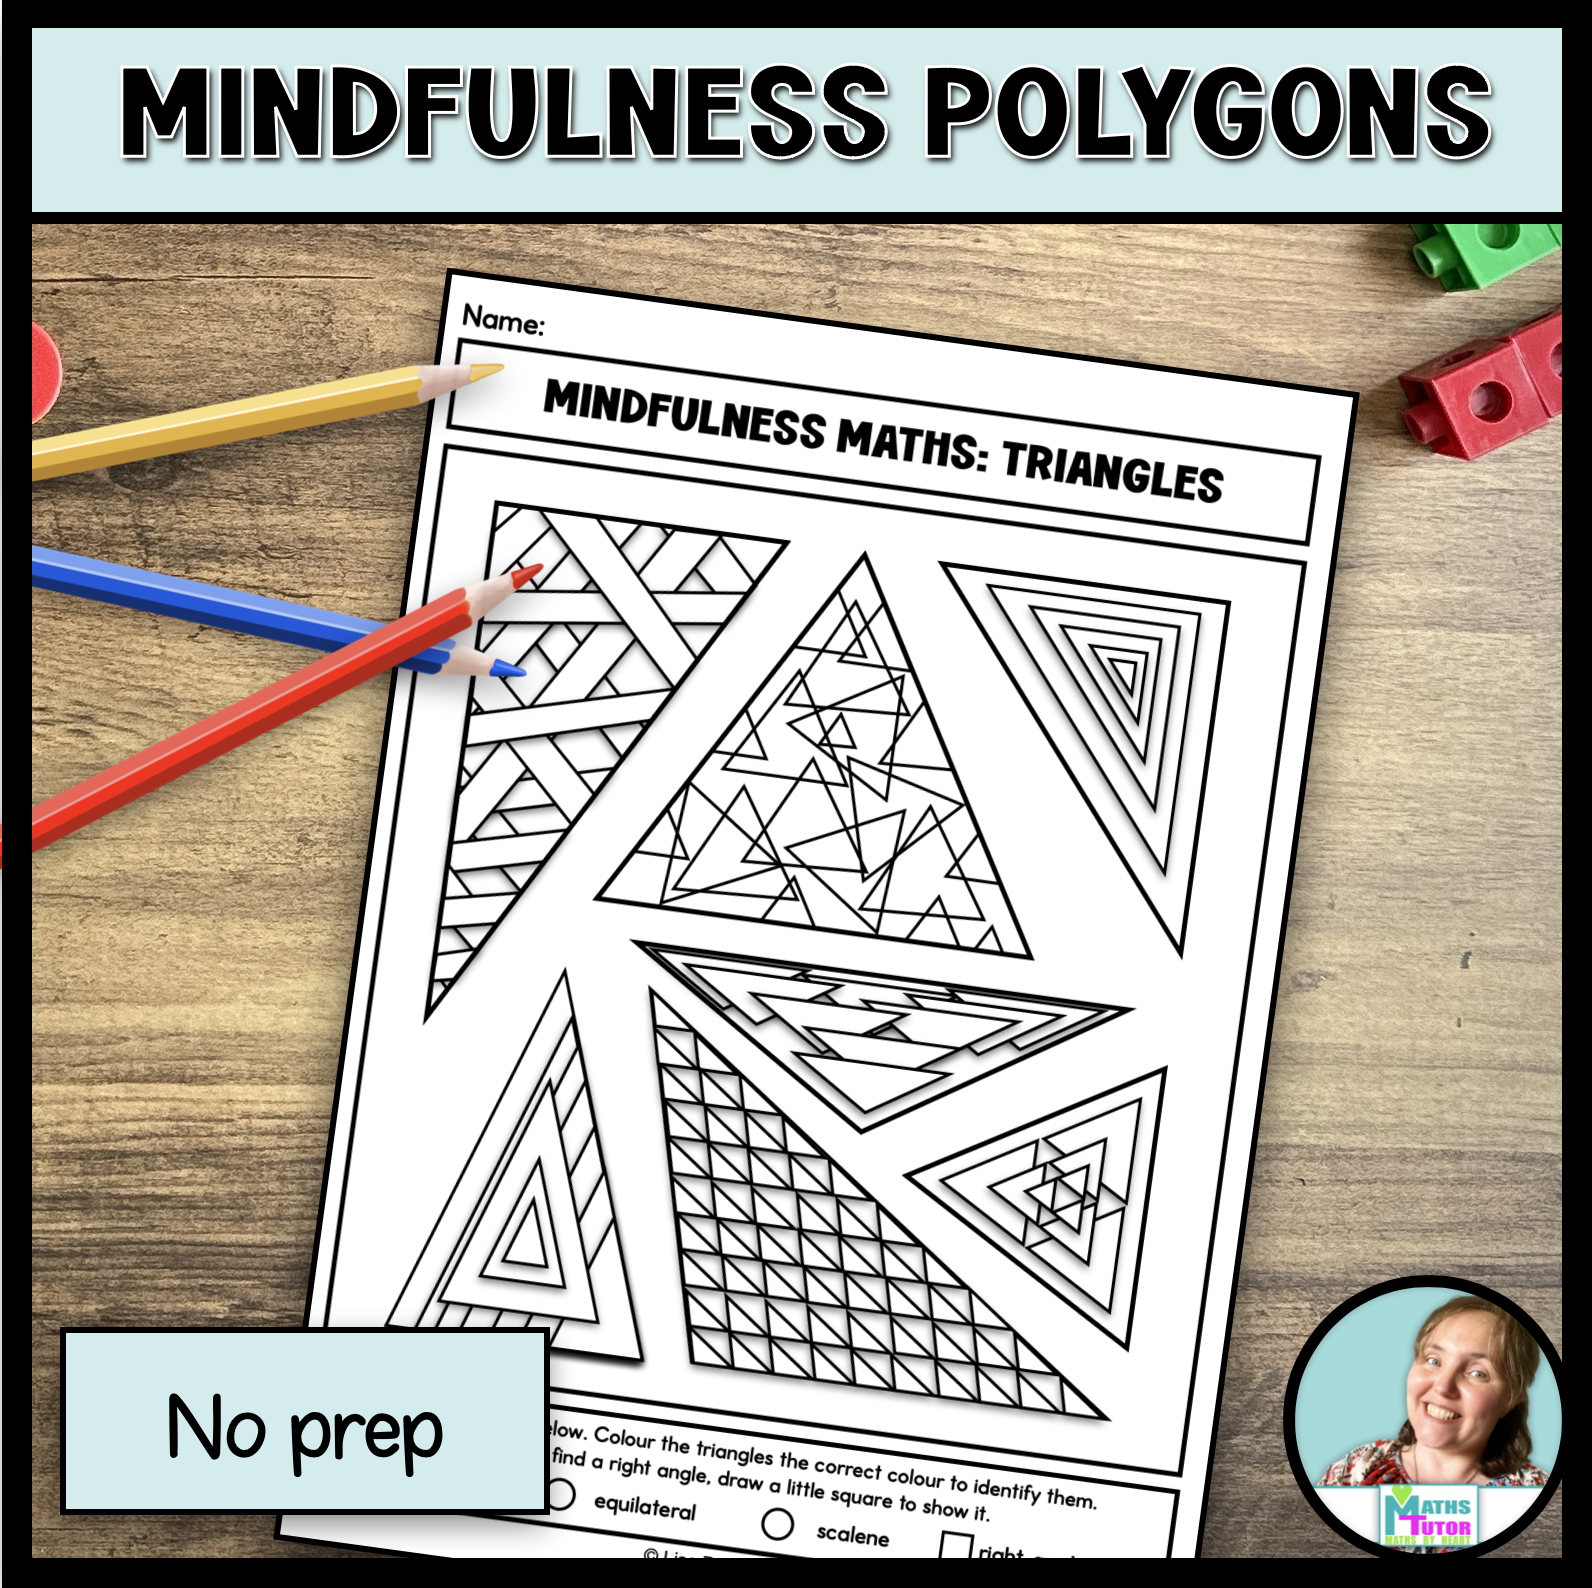 Mindfulness colouring pages maths polygons teaching resources